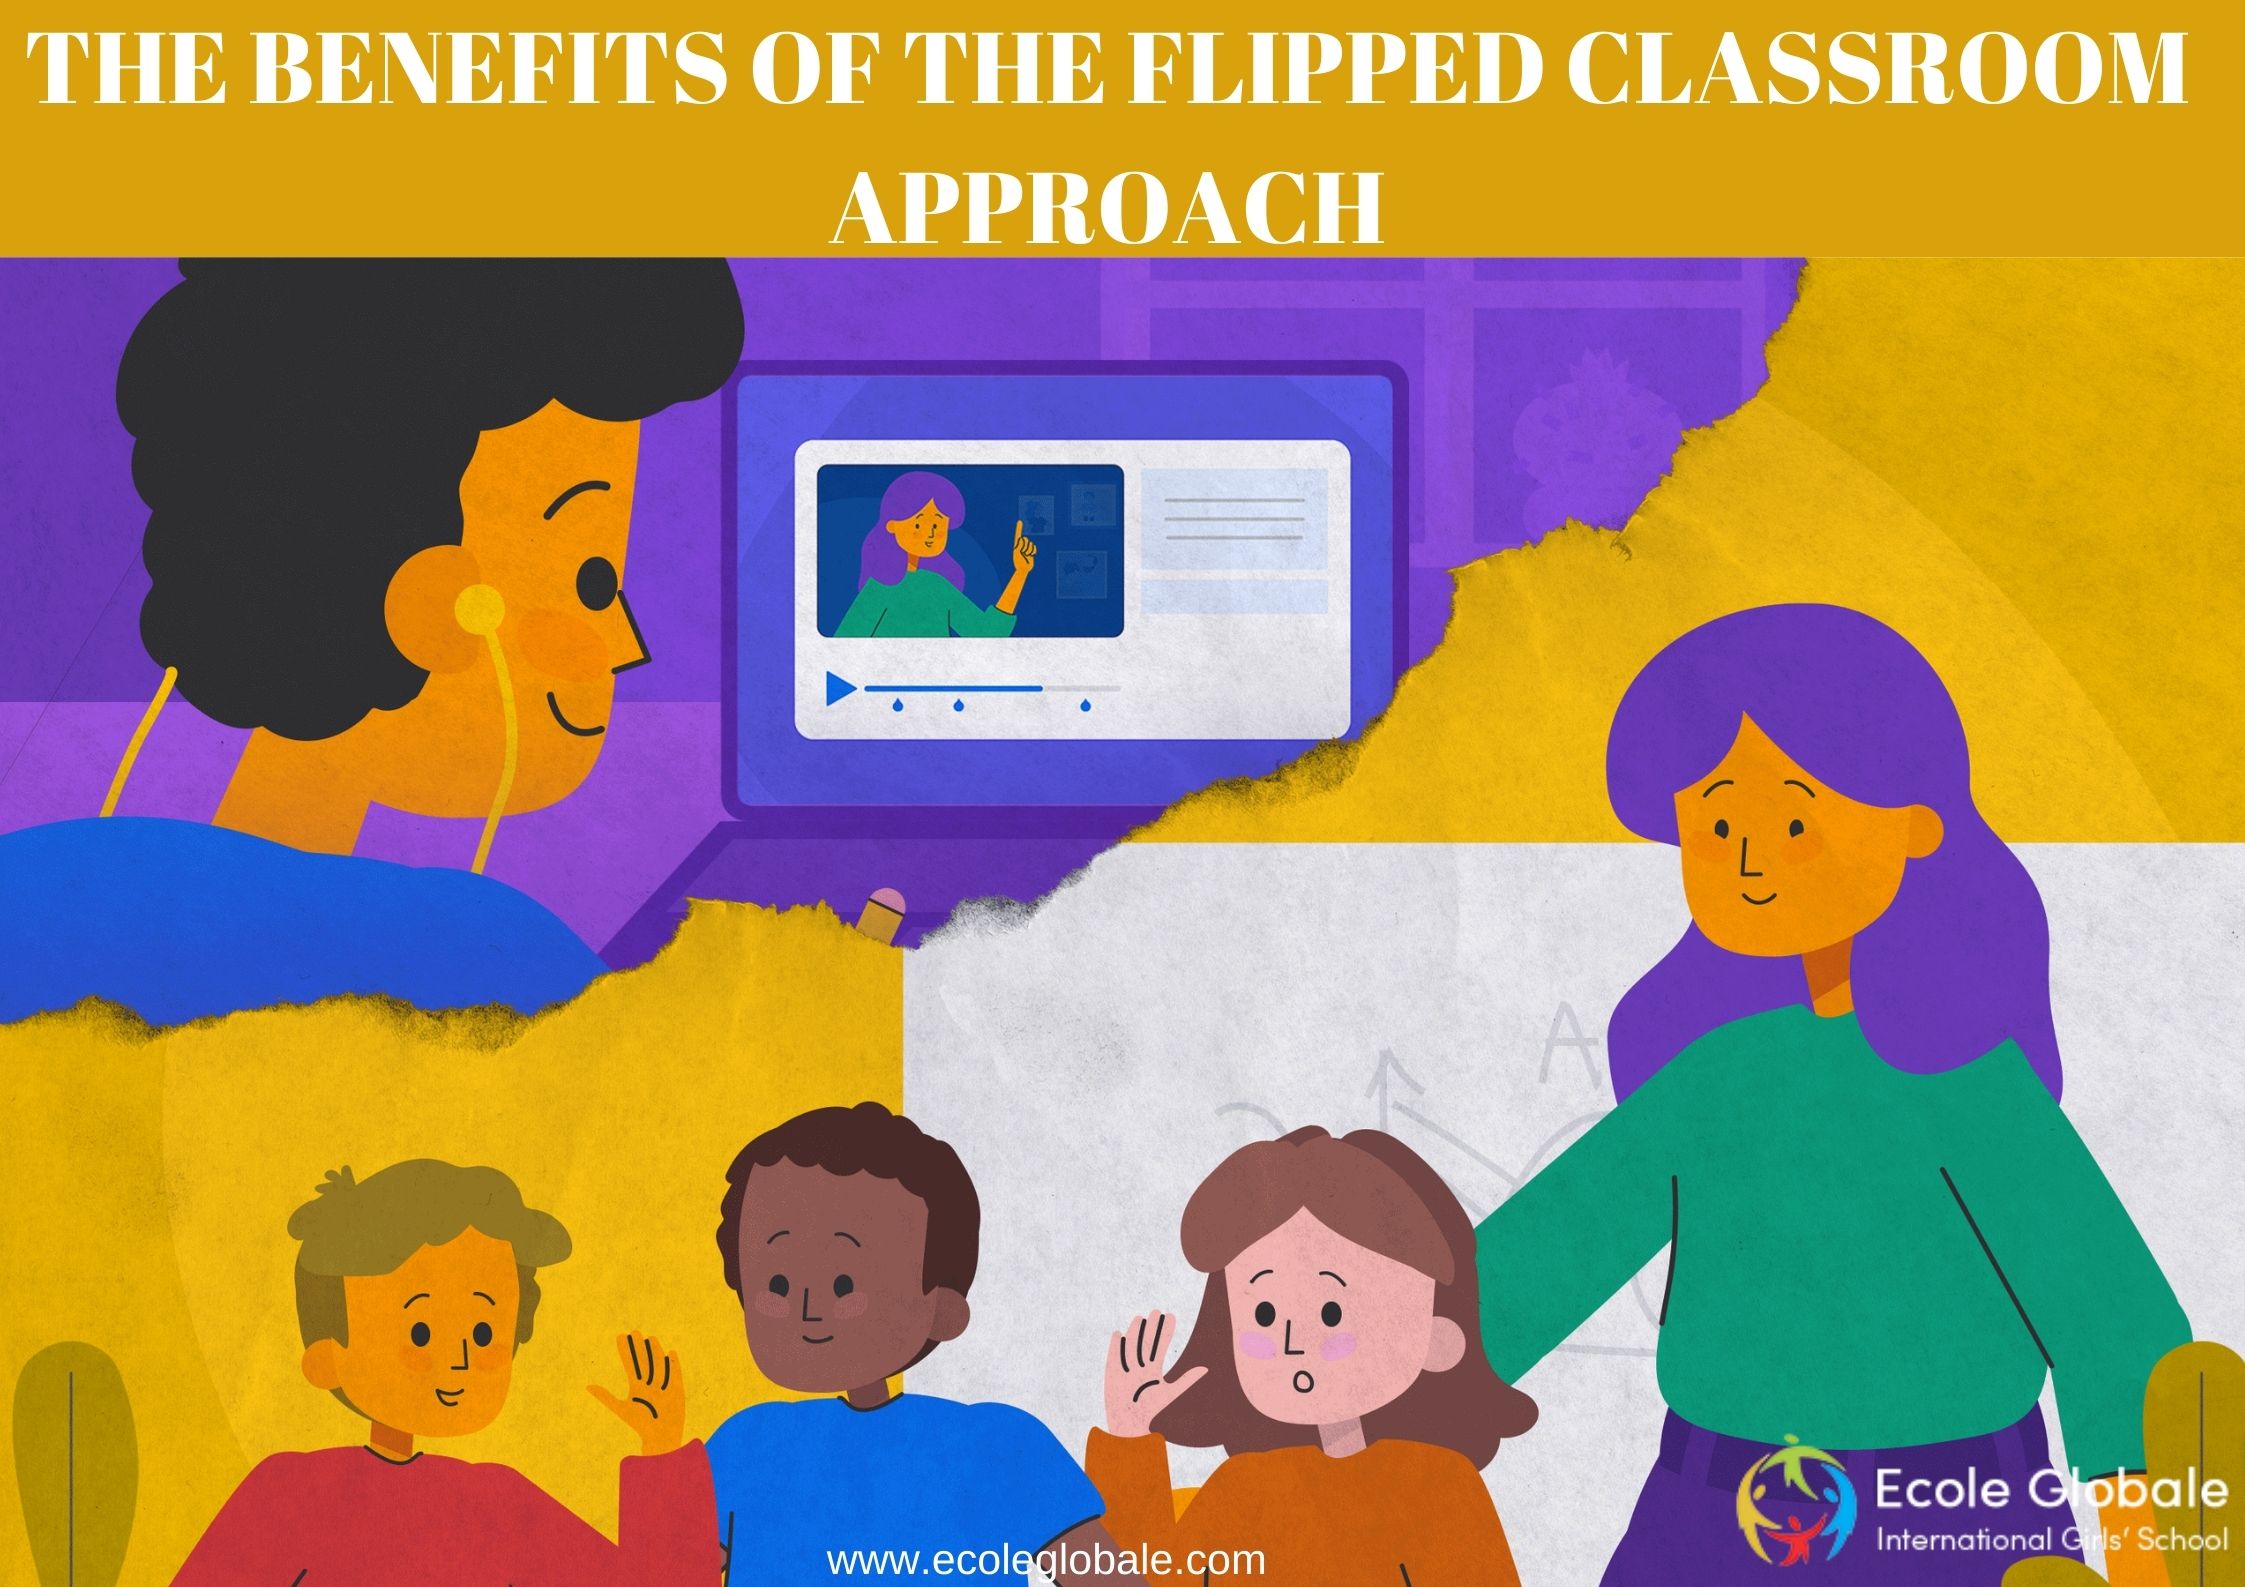 THE BENEFITS OF THE FLIPPED CLASSROOM APPROACH